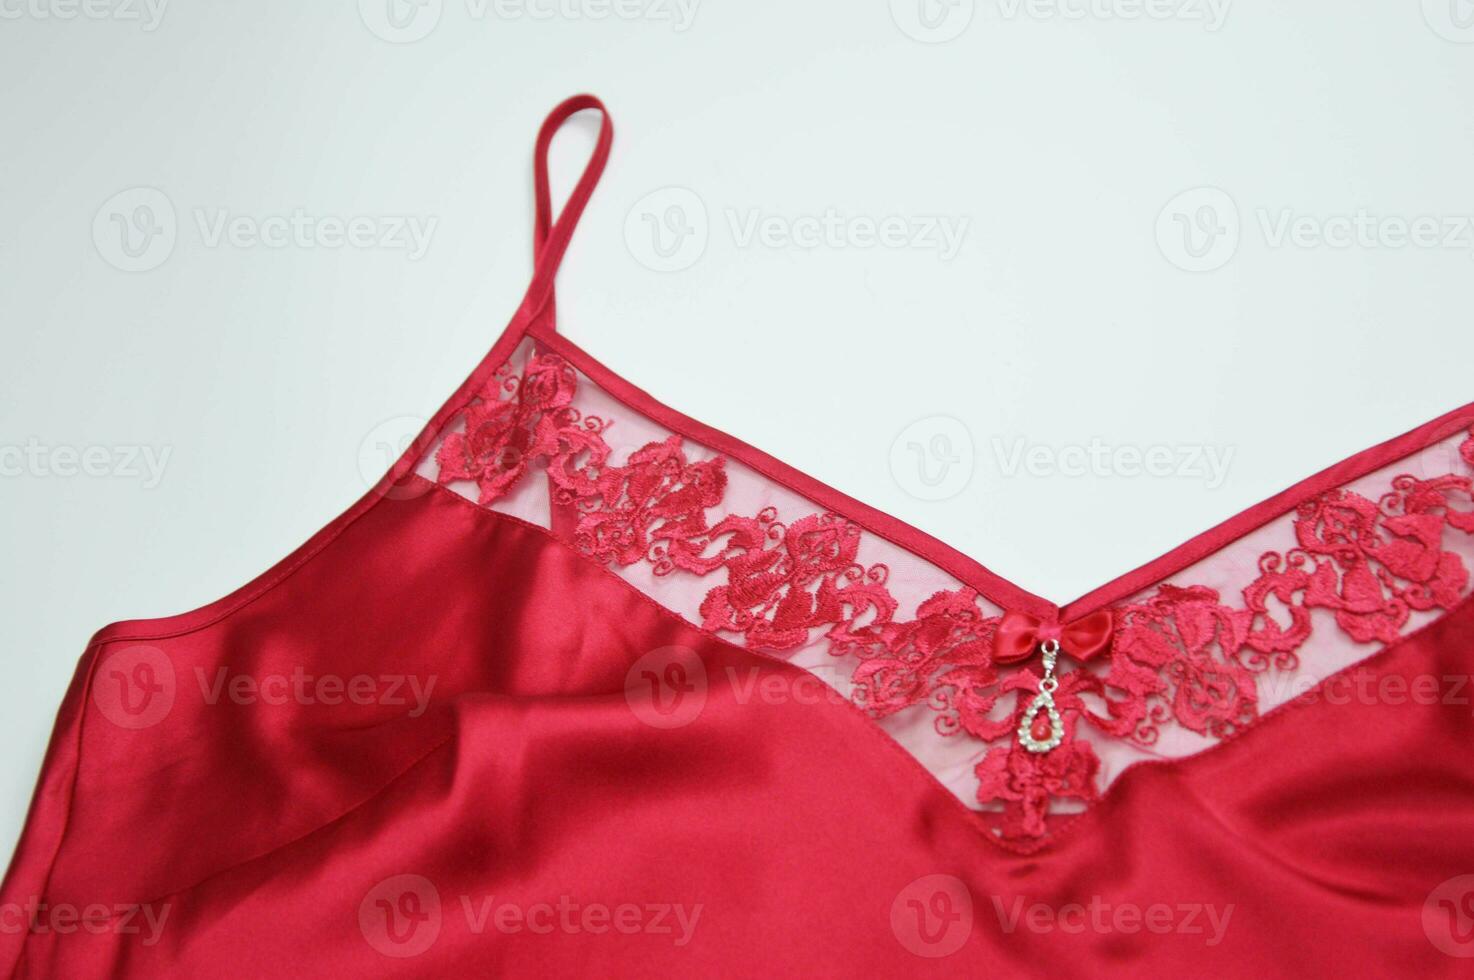 Lacy Lingerie Red Stock Photos and Images - 123RF